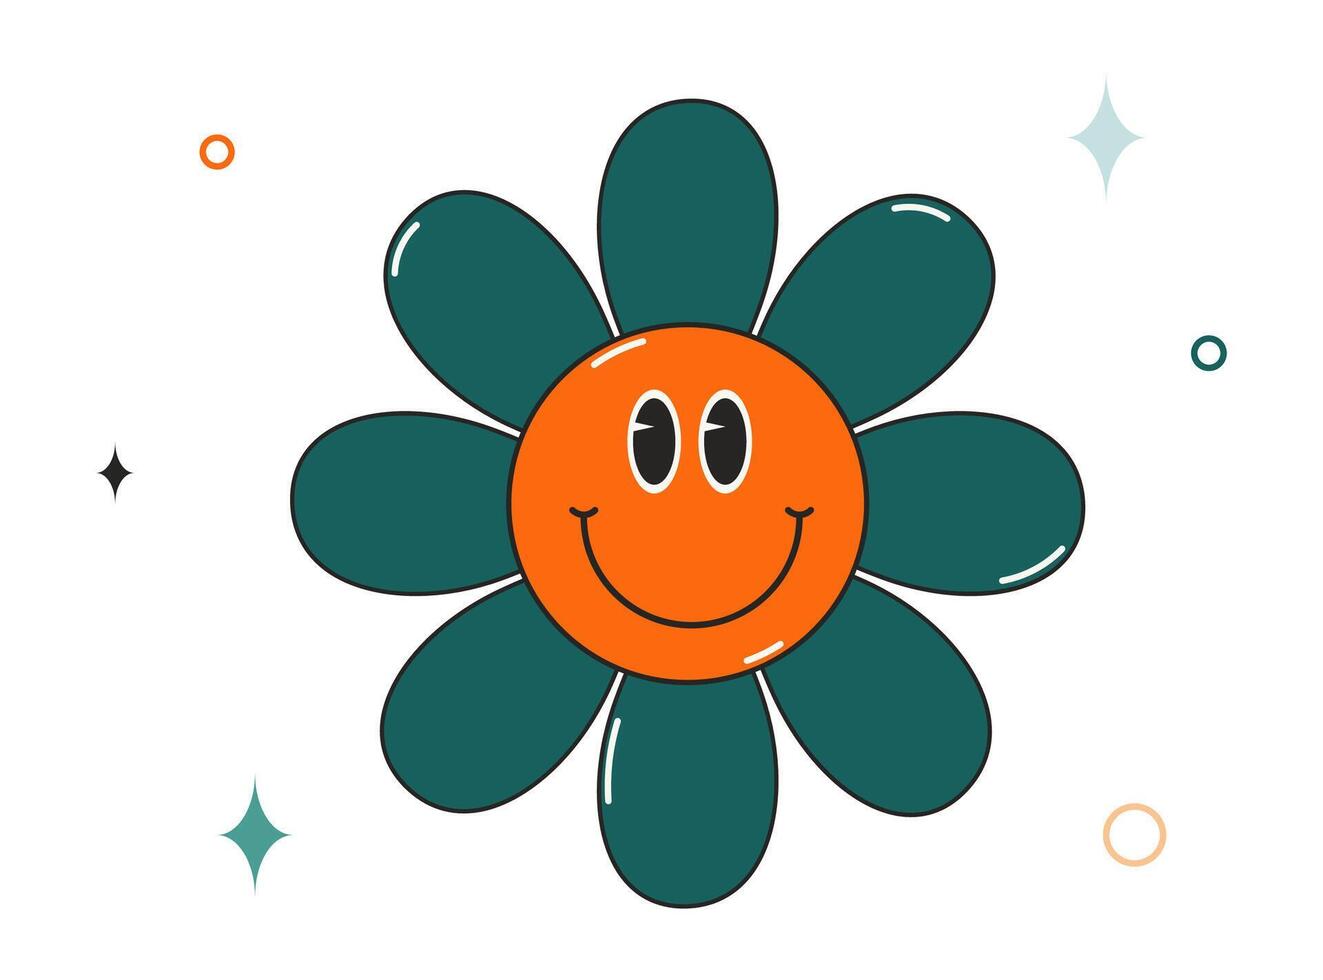 Groovy flower character. Hippie 70s style. Sticker, t-shirt design in trendy retro style. Vector illustration isolated on a white background.